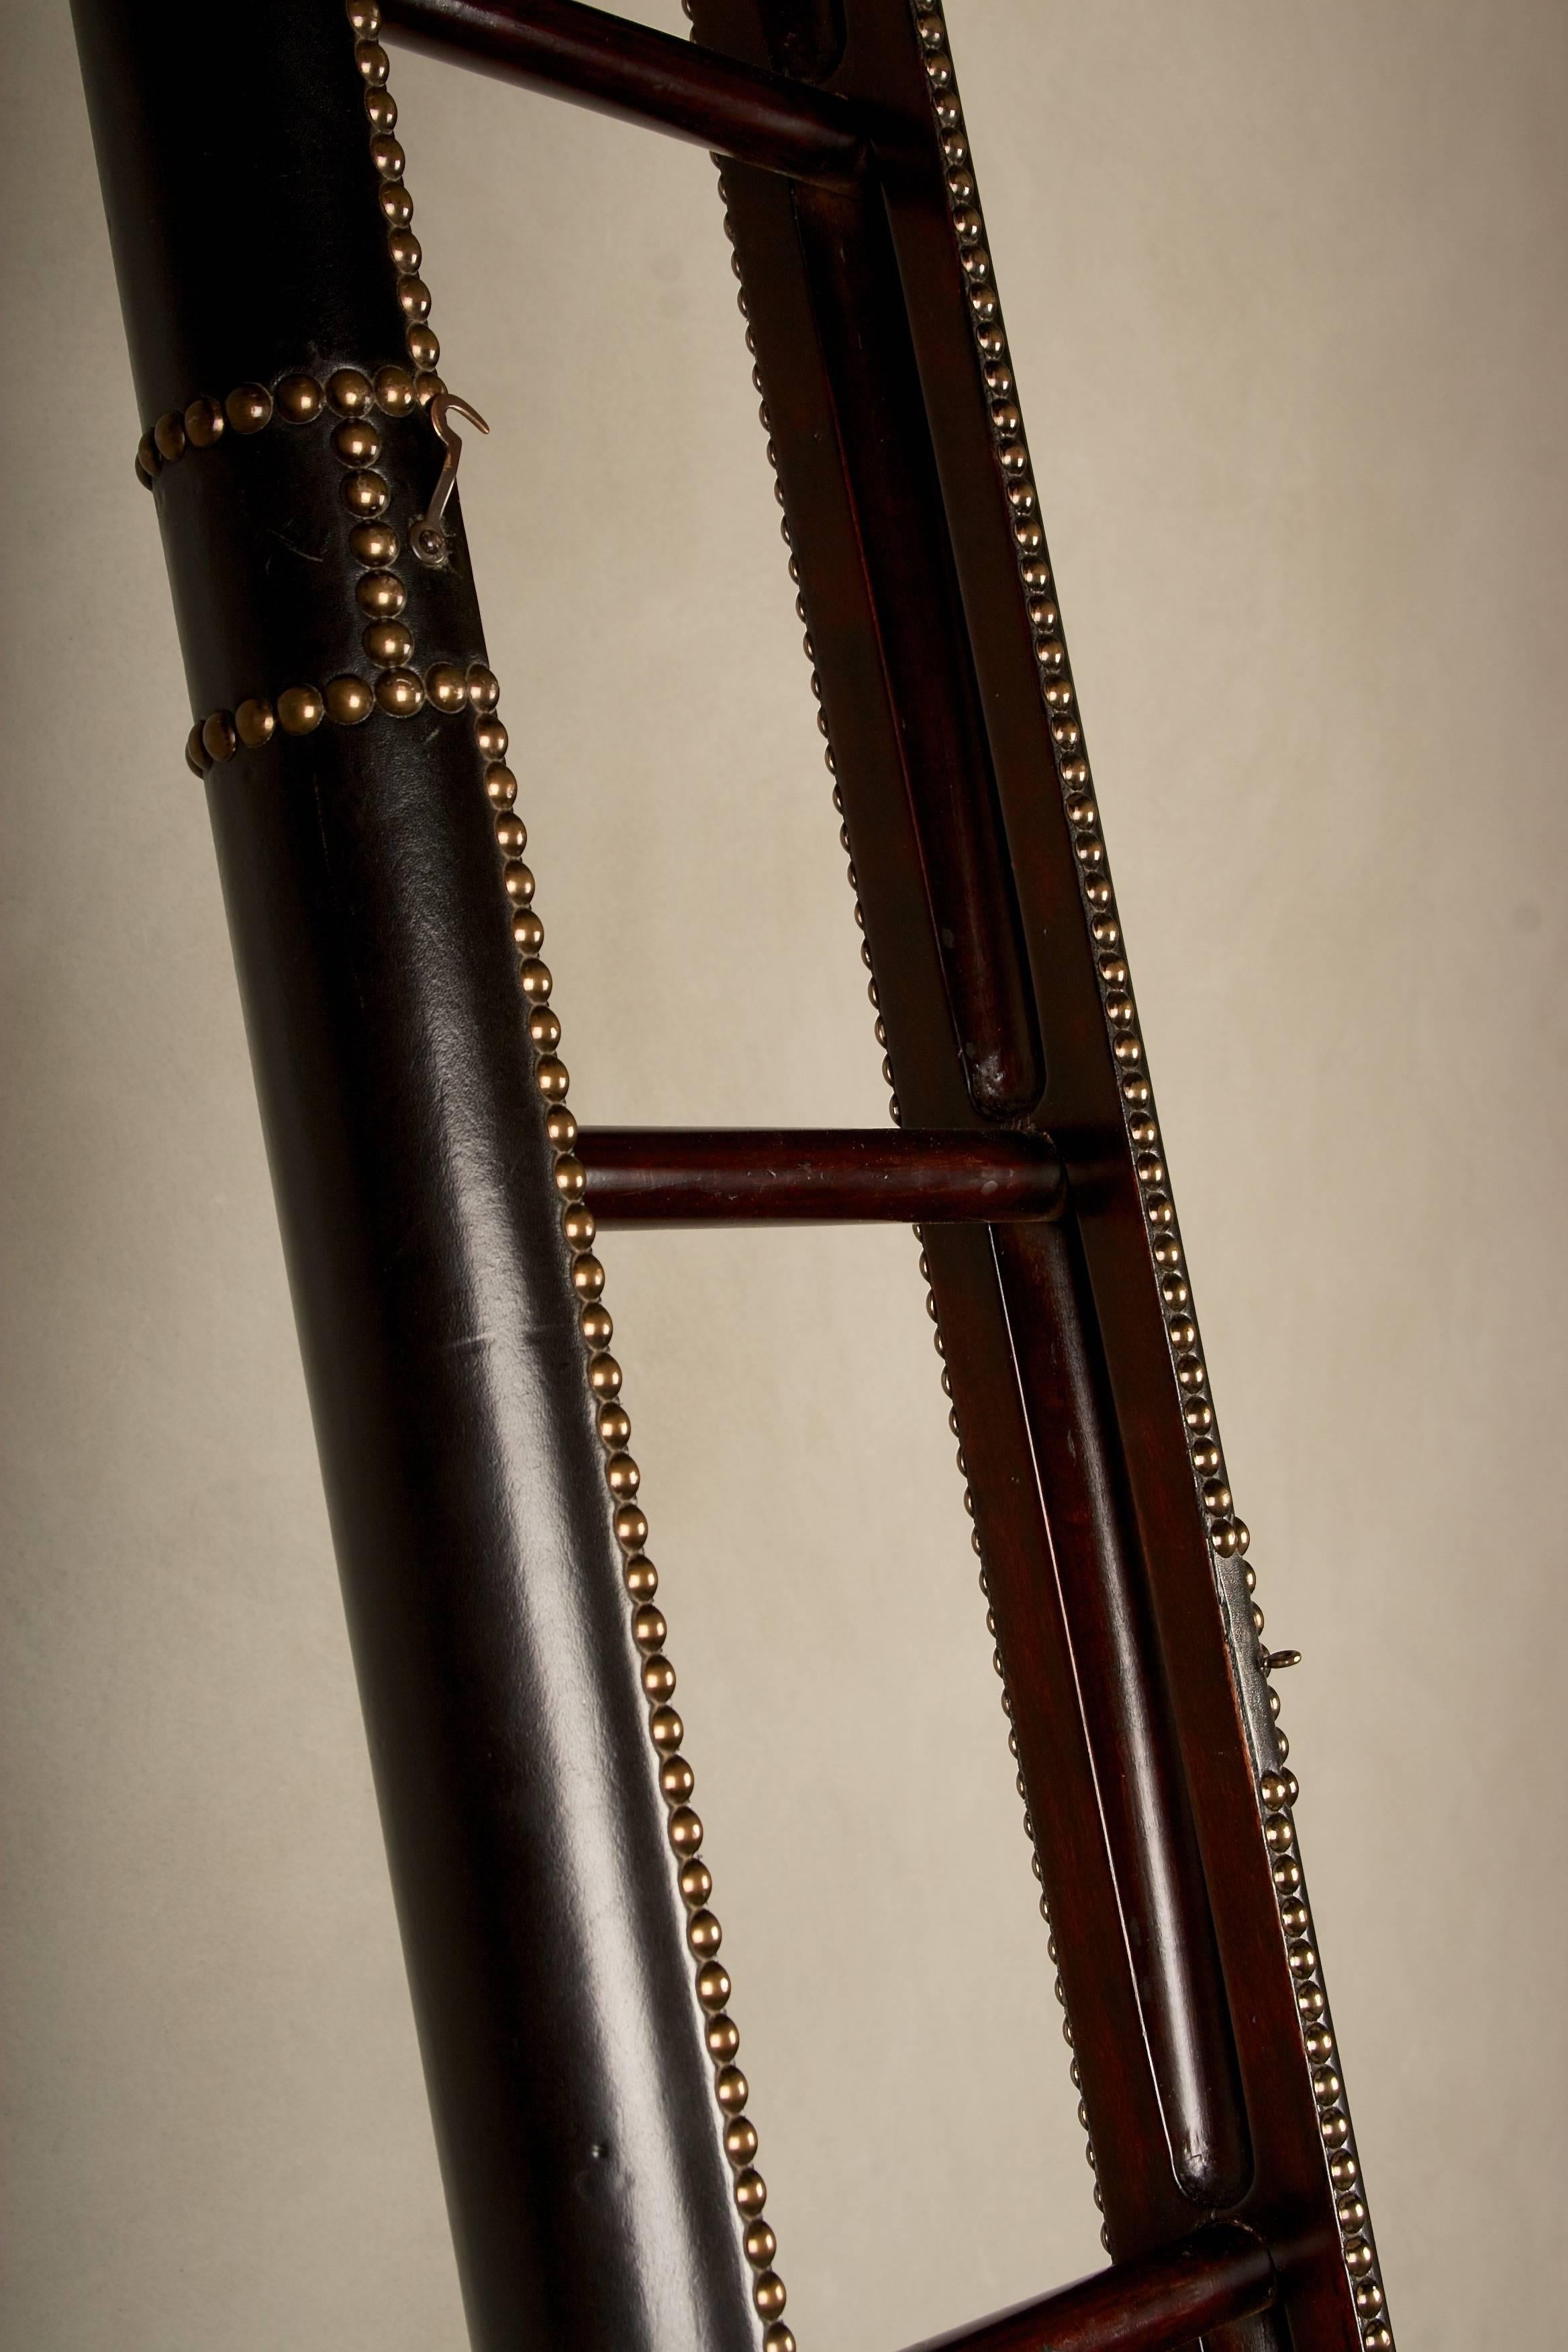 A wonderful 19th century elephant ladder, in fine mahogany with leather
and nailhead trim. The ladder folds into a pole with an ingenious mechanism.
This ladder was once sold by the famous Antonio's Antiques of Jackson
Square, in San Francisco, and